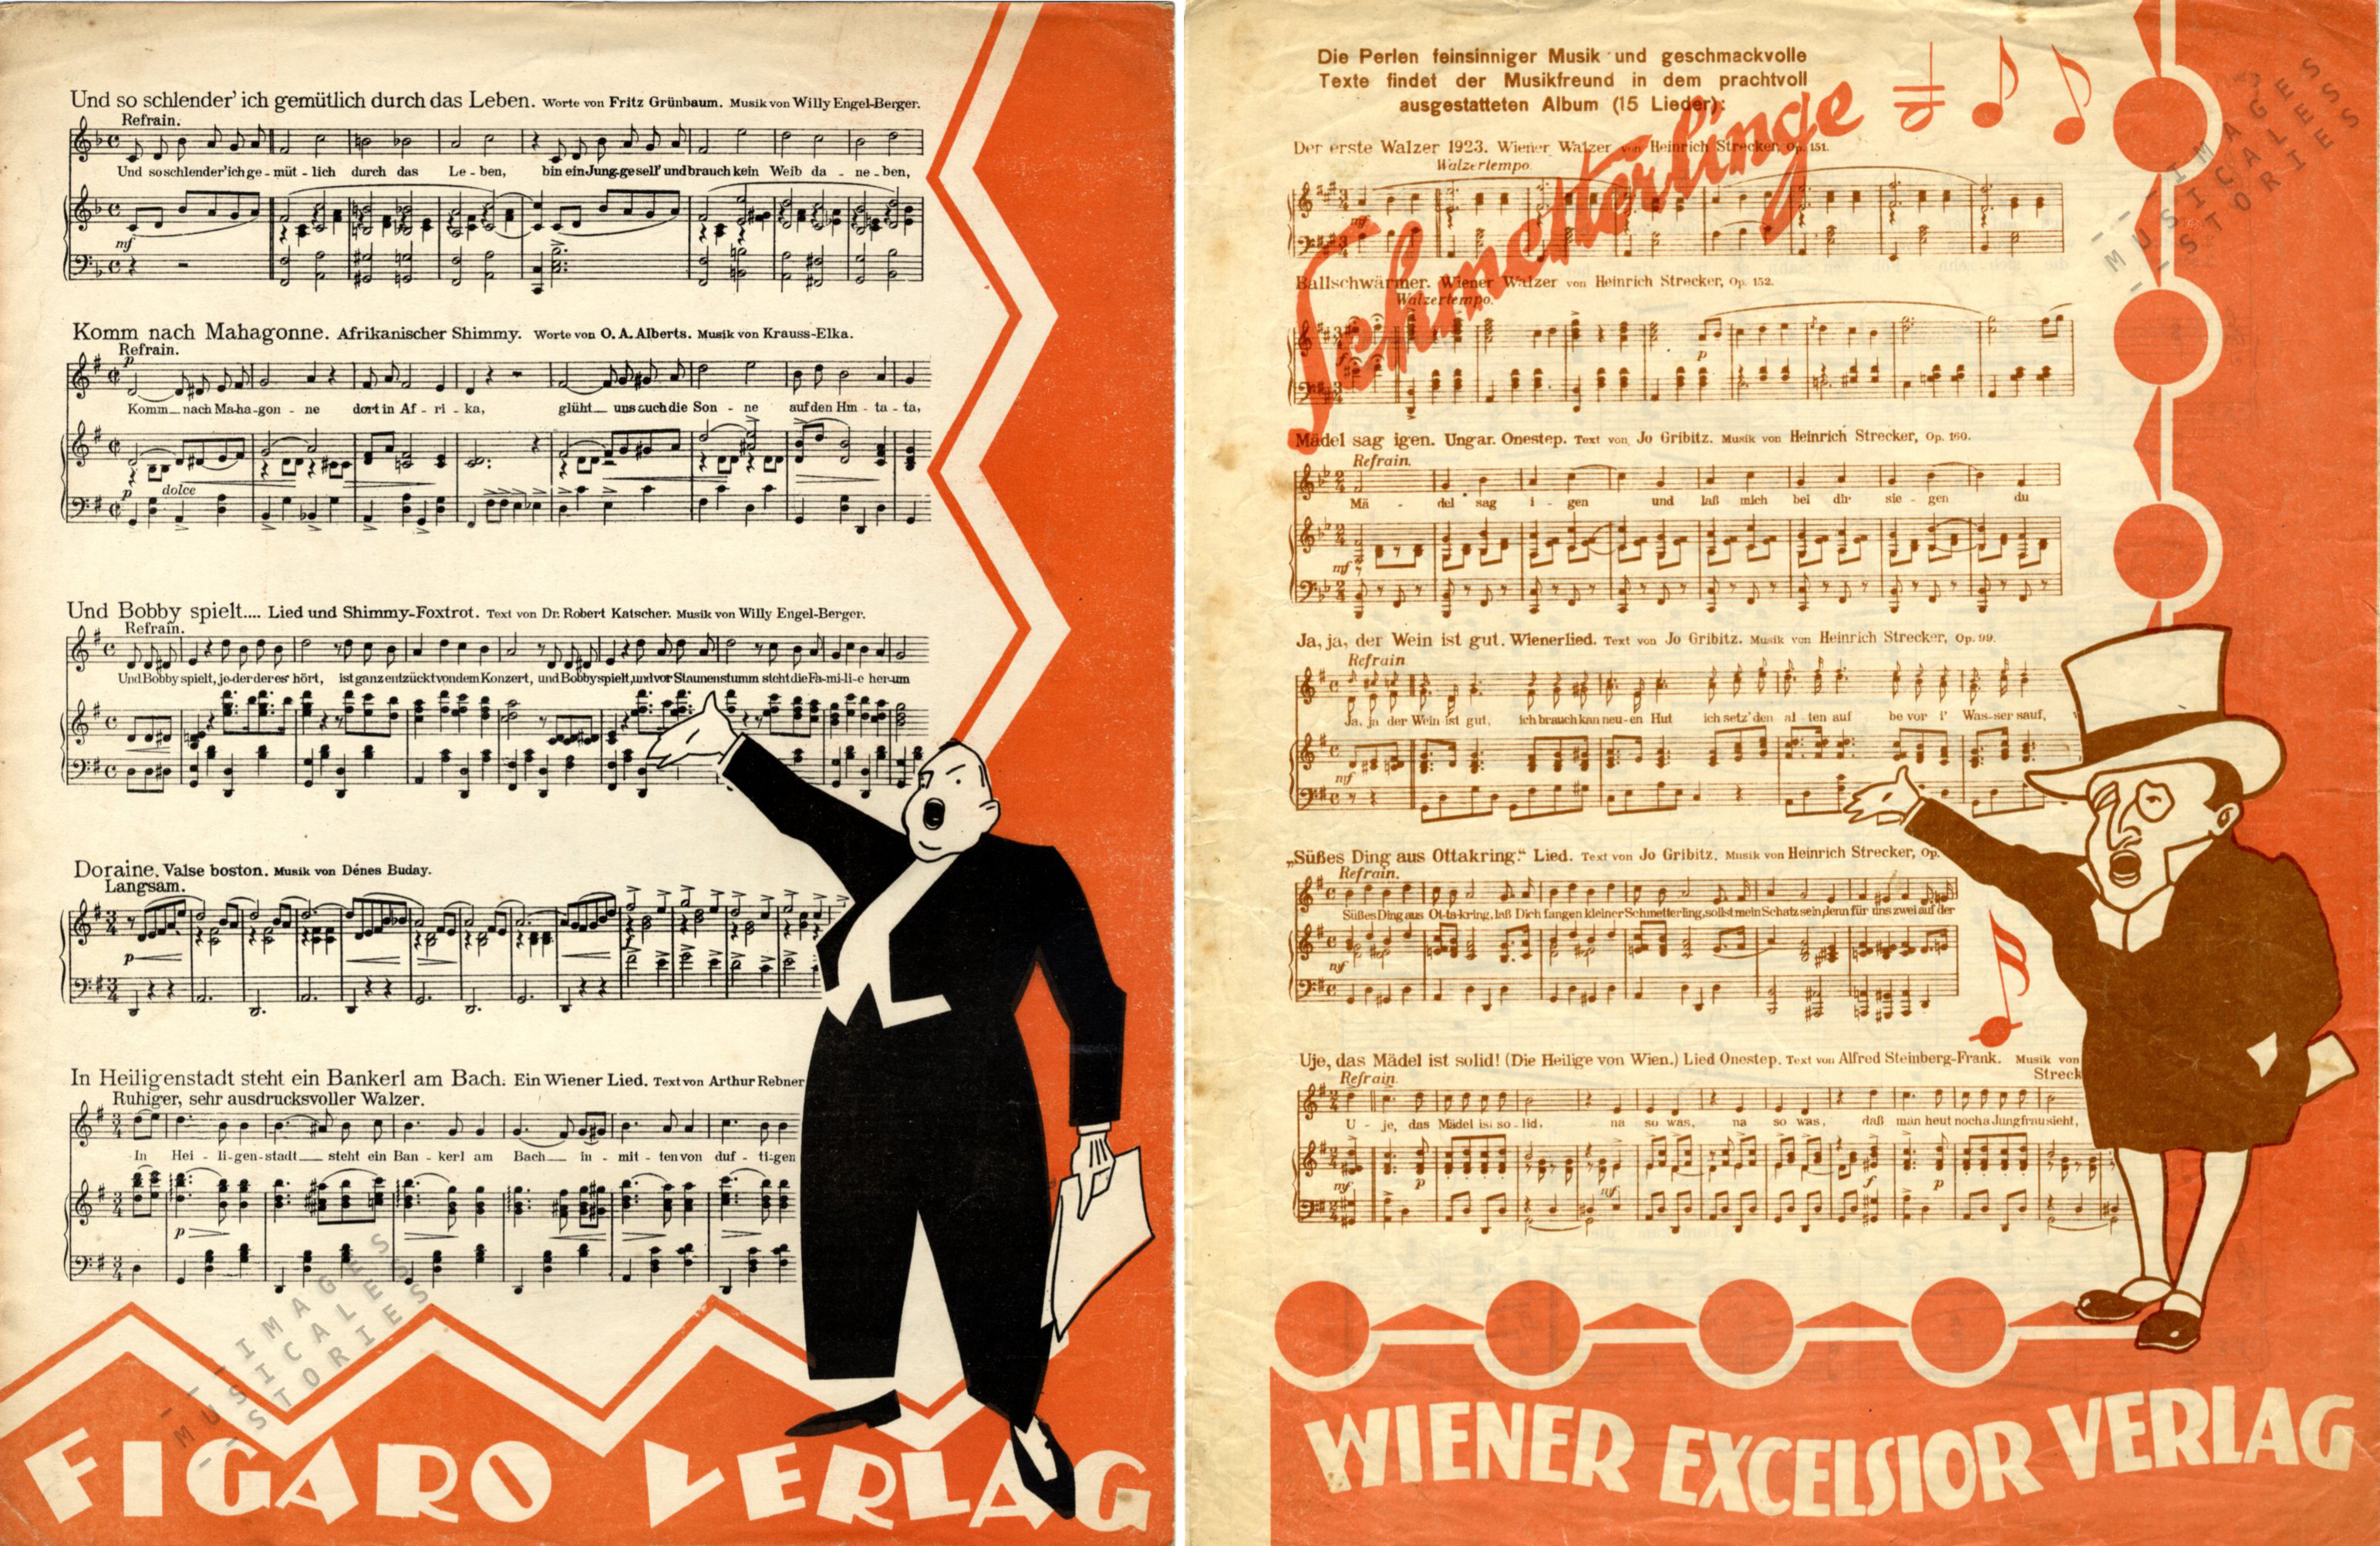 Two very similar back covers using a stage announcer (or singer?). Figaro Verlag on the left, and Wiener Excelsior Verlag on the right (both unsigned, s.d.) 